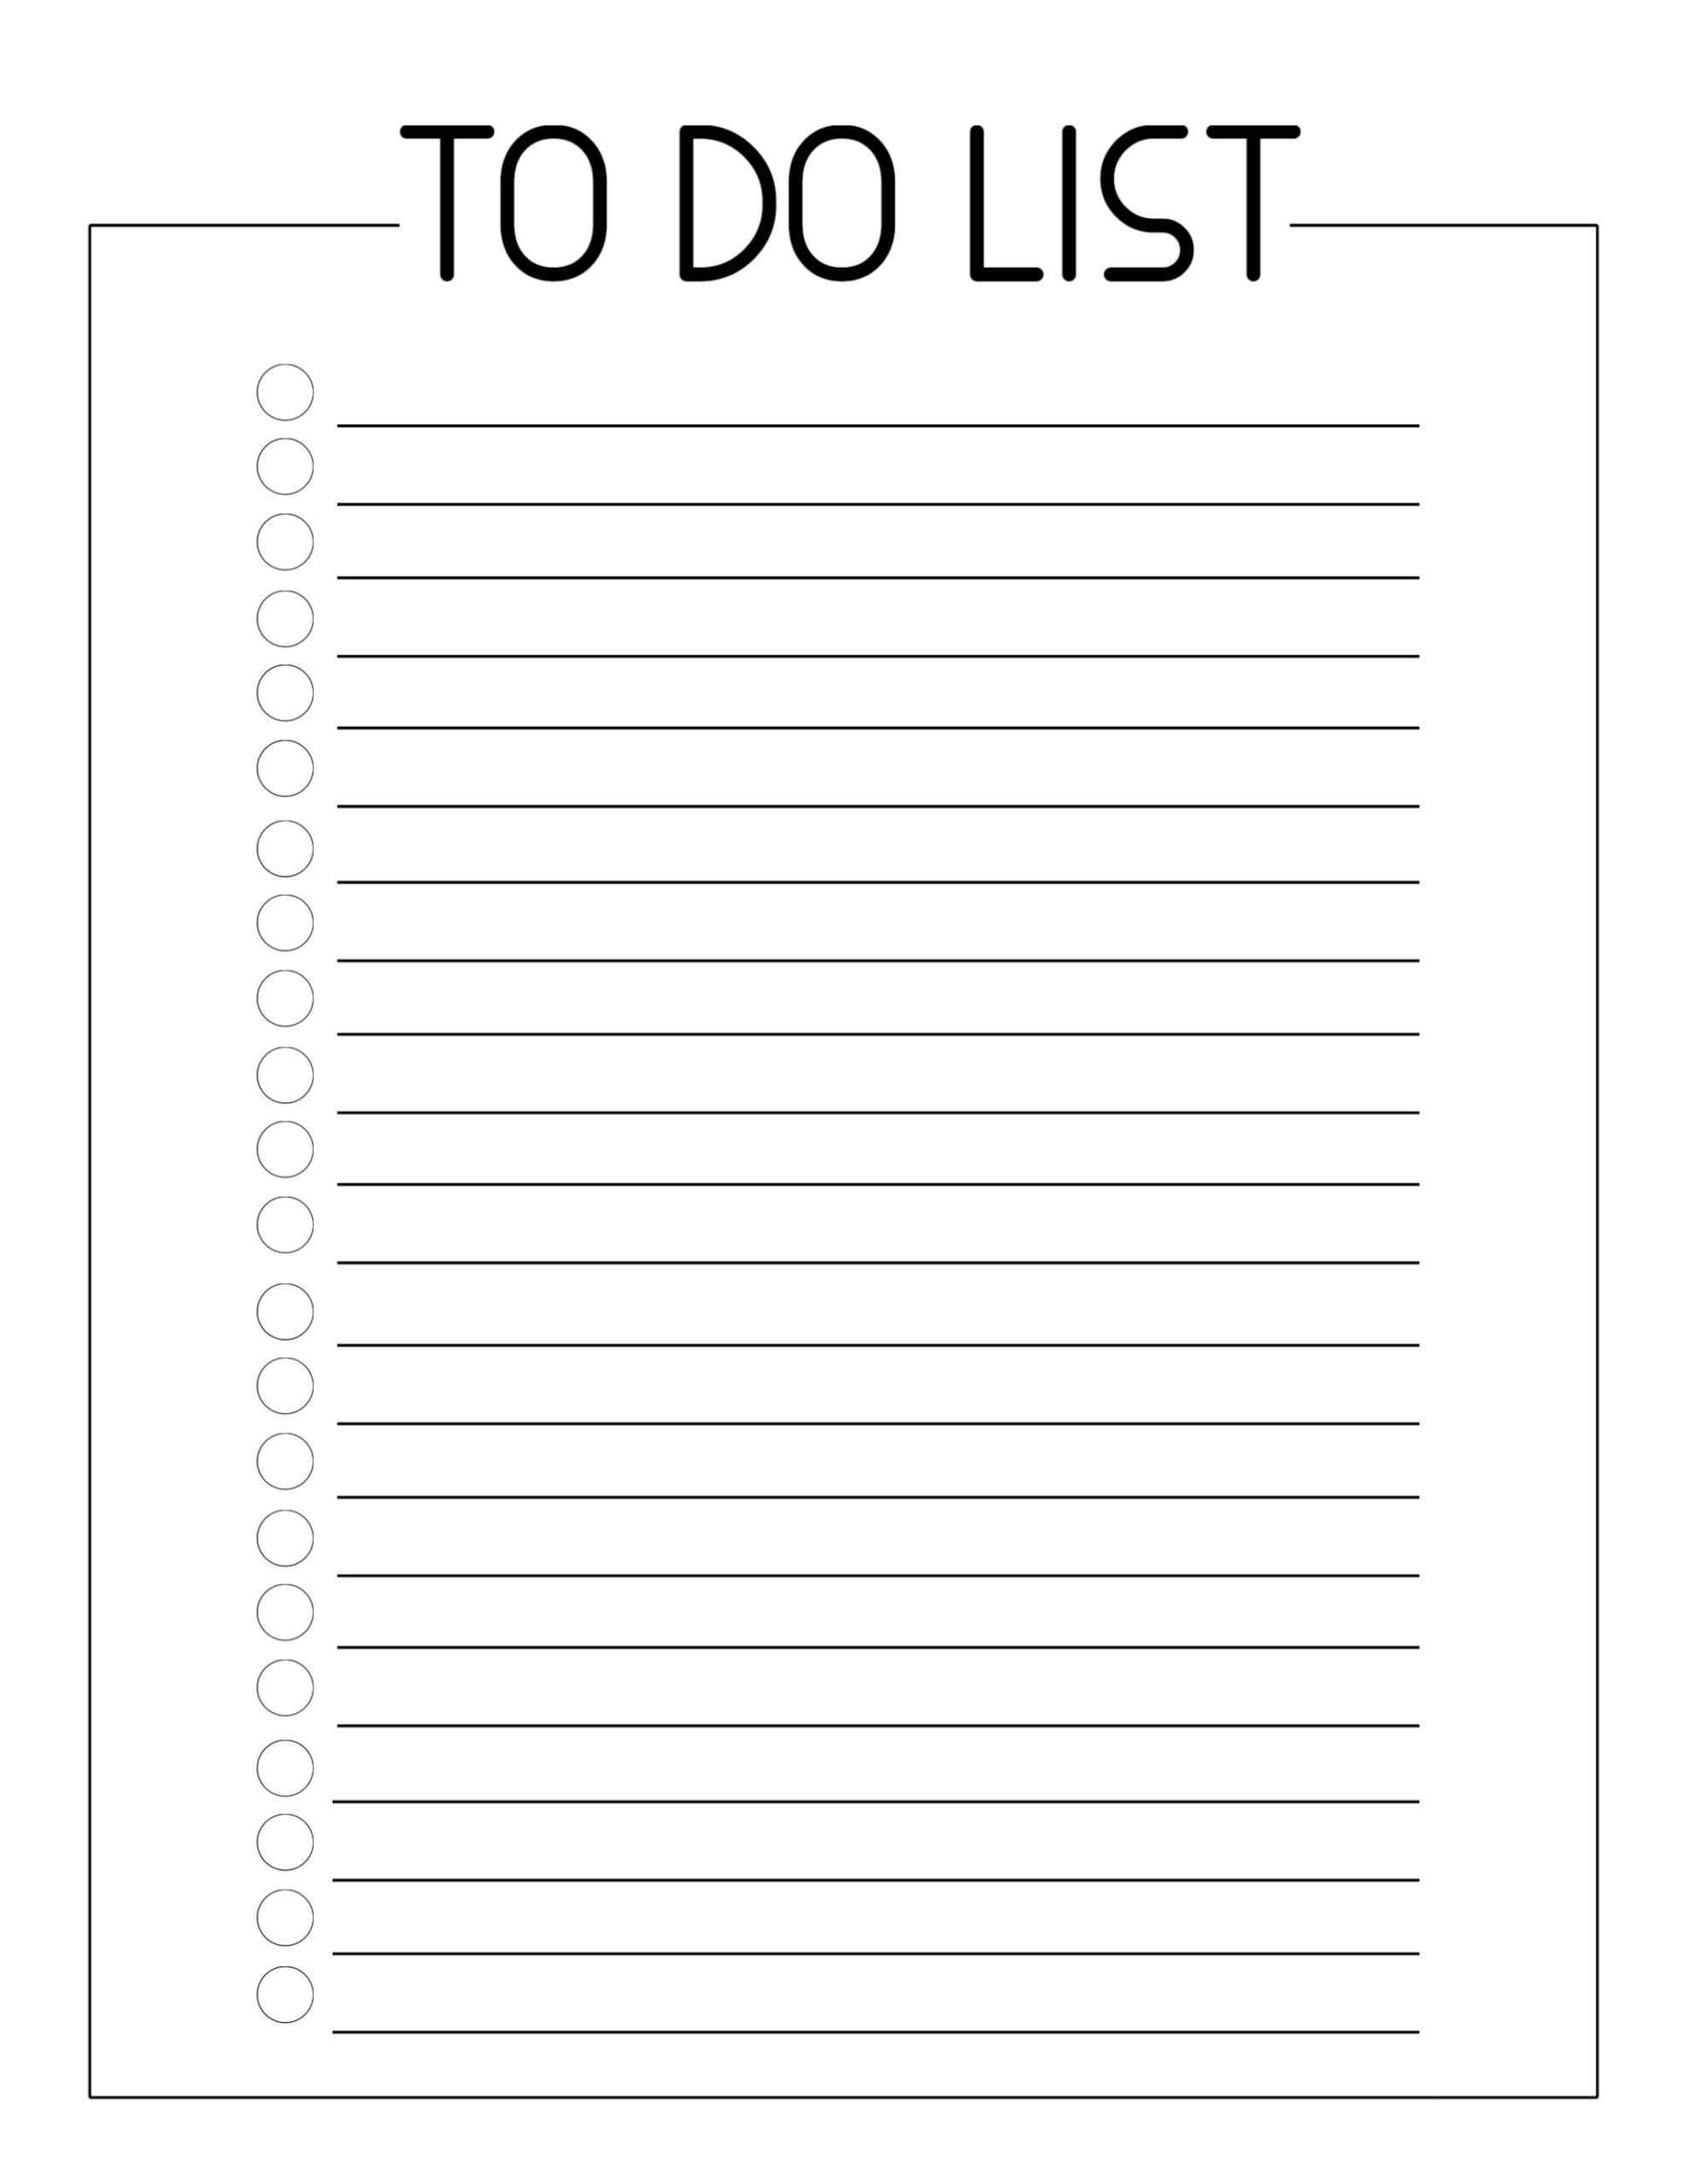 Free Printable To Do Checklist Template - Paper Trail Design In Blank To Do List Template